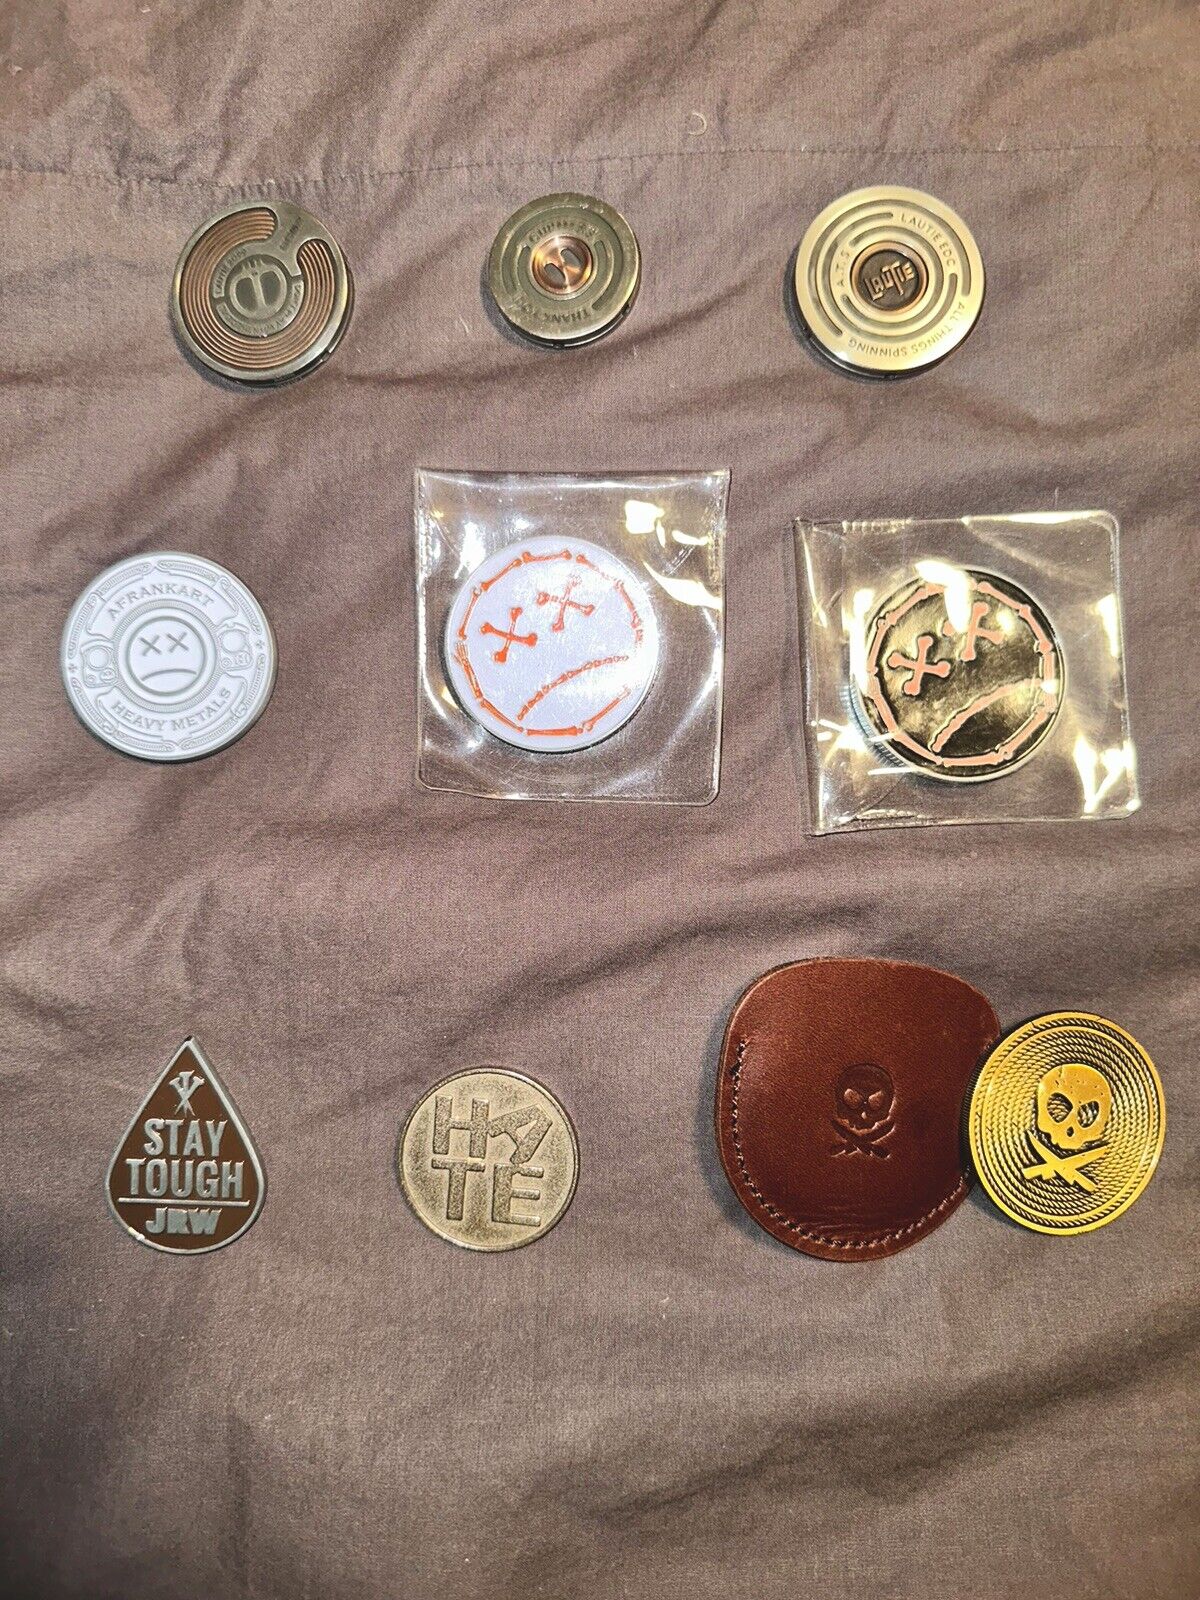 EDC Coin Lot. Every Day Carry Pocket Coins. Lautie. AFK. Pirate. JRW. Hate Proj